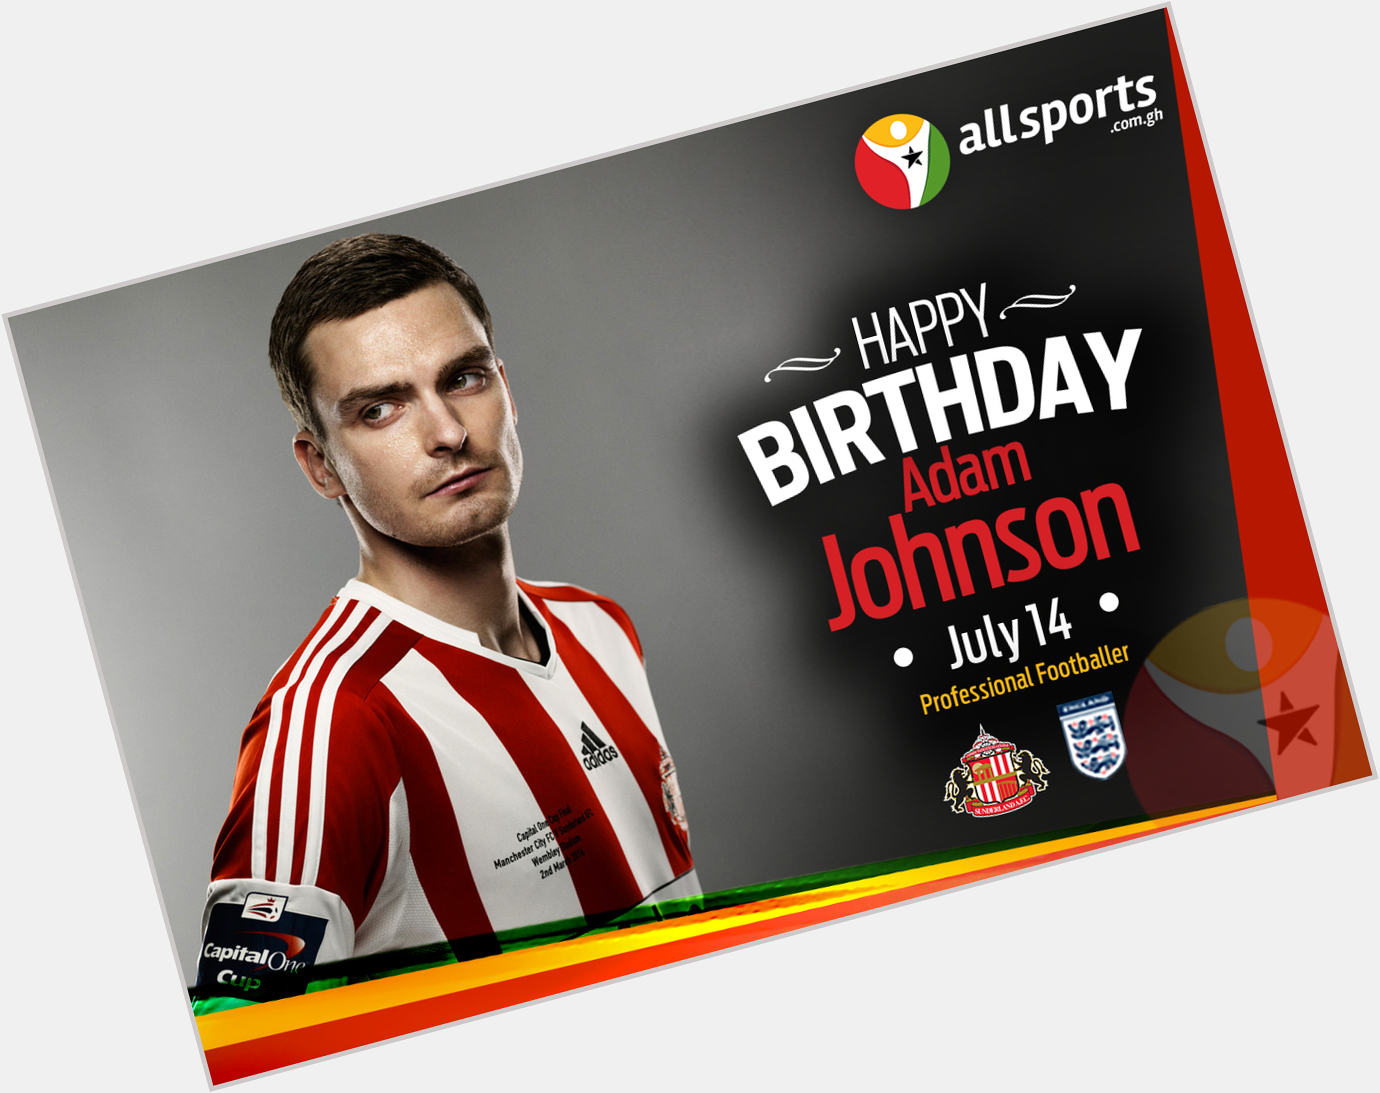 AllSportsGh wishes Adam Johnson a HAPPY BIRTHDAY as he turns 28 today and all the best in his career. 